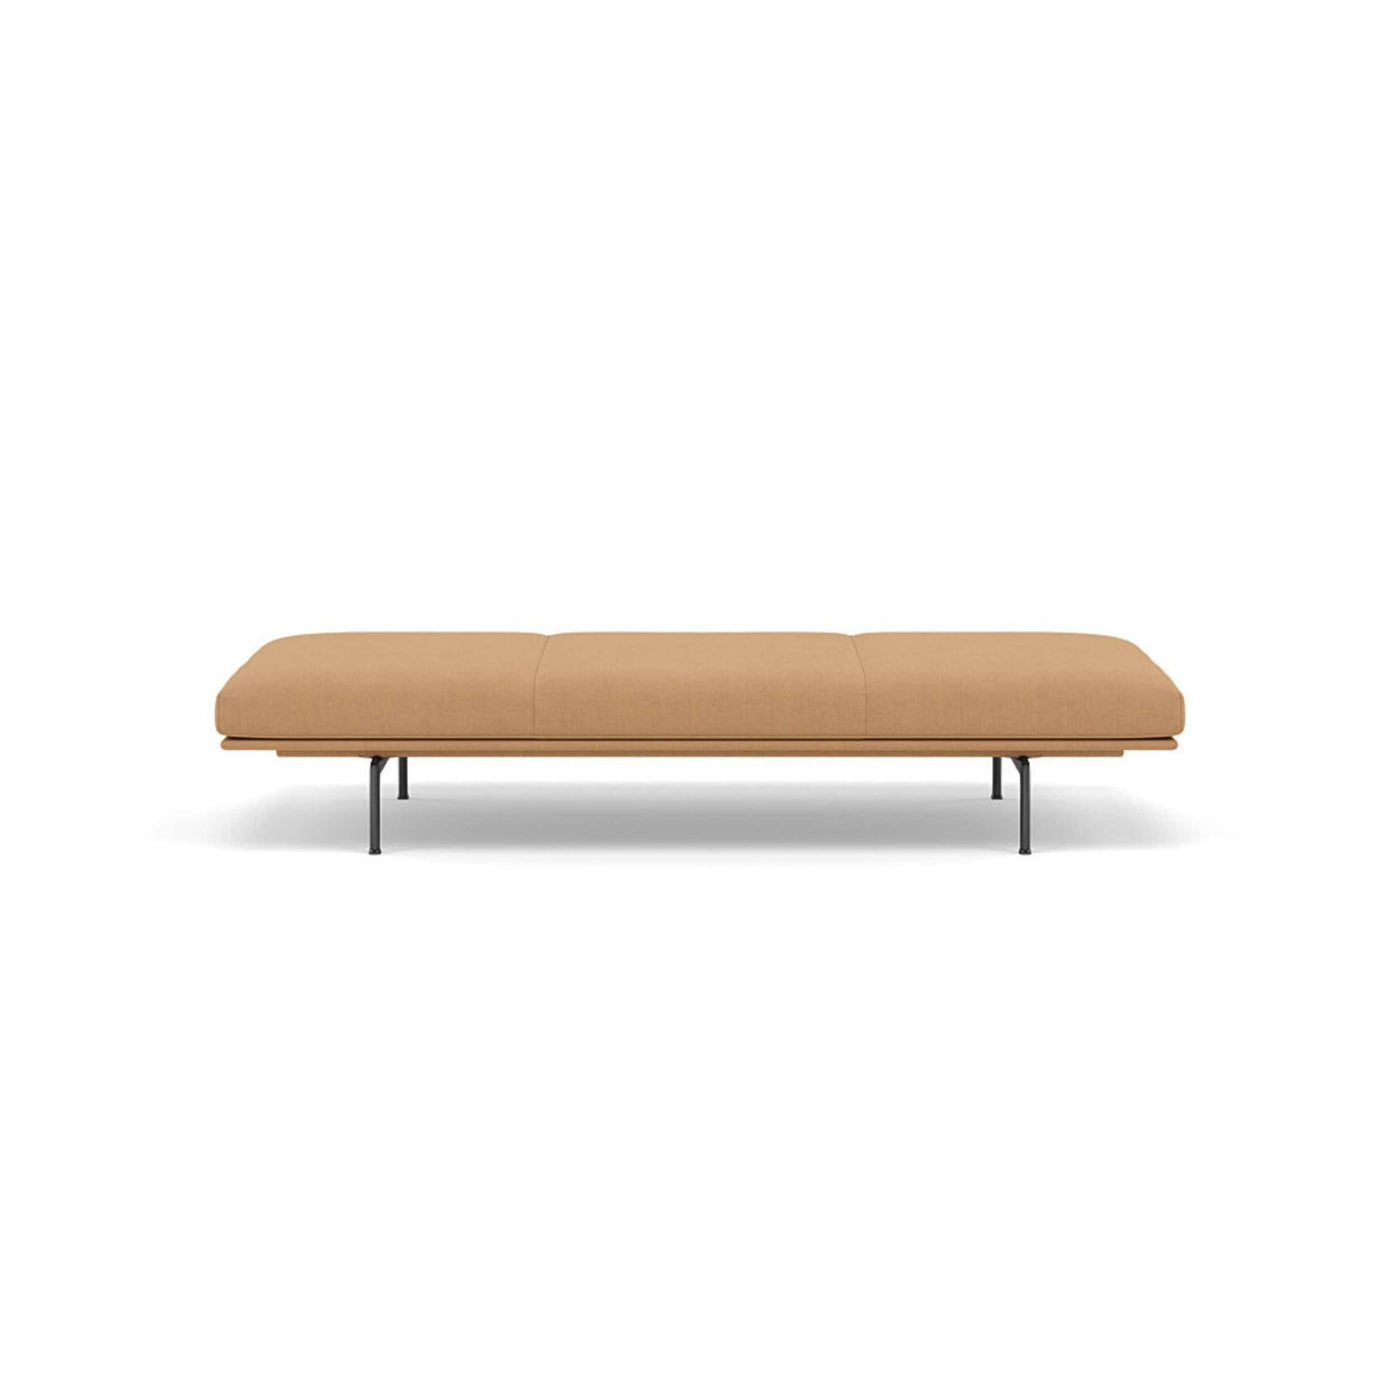 muuto outline daybed in fiord 451 fabric and black legs. Made to order from someday designs. #colour_fiord-451